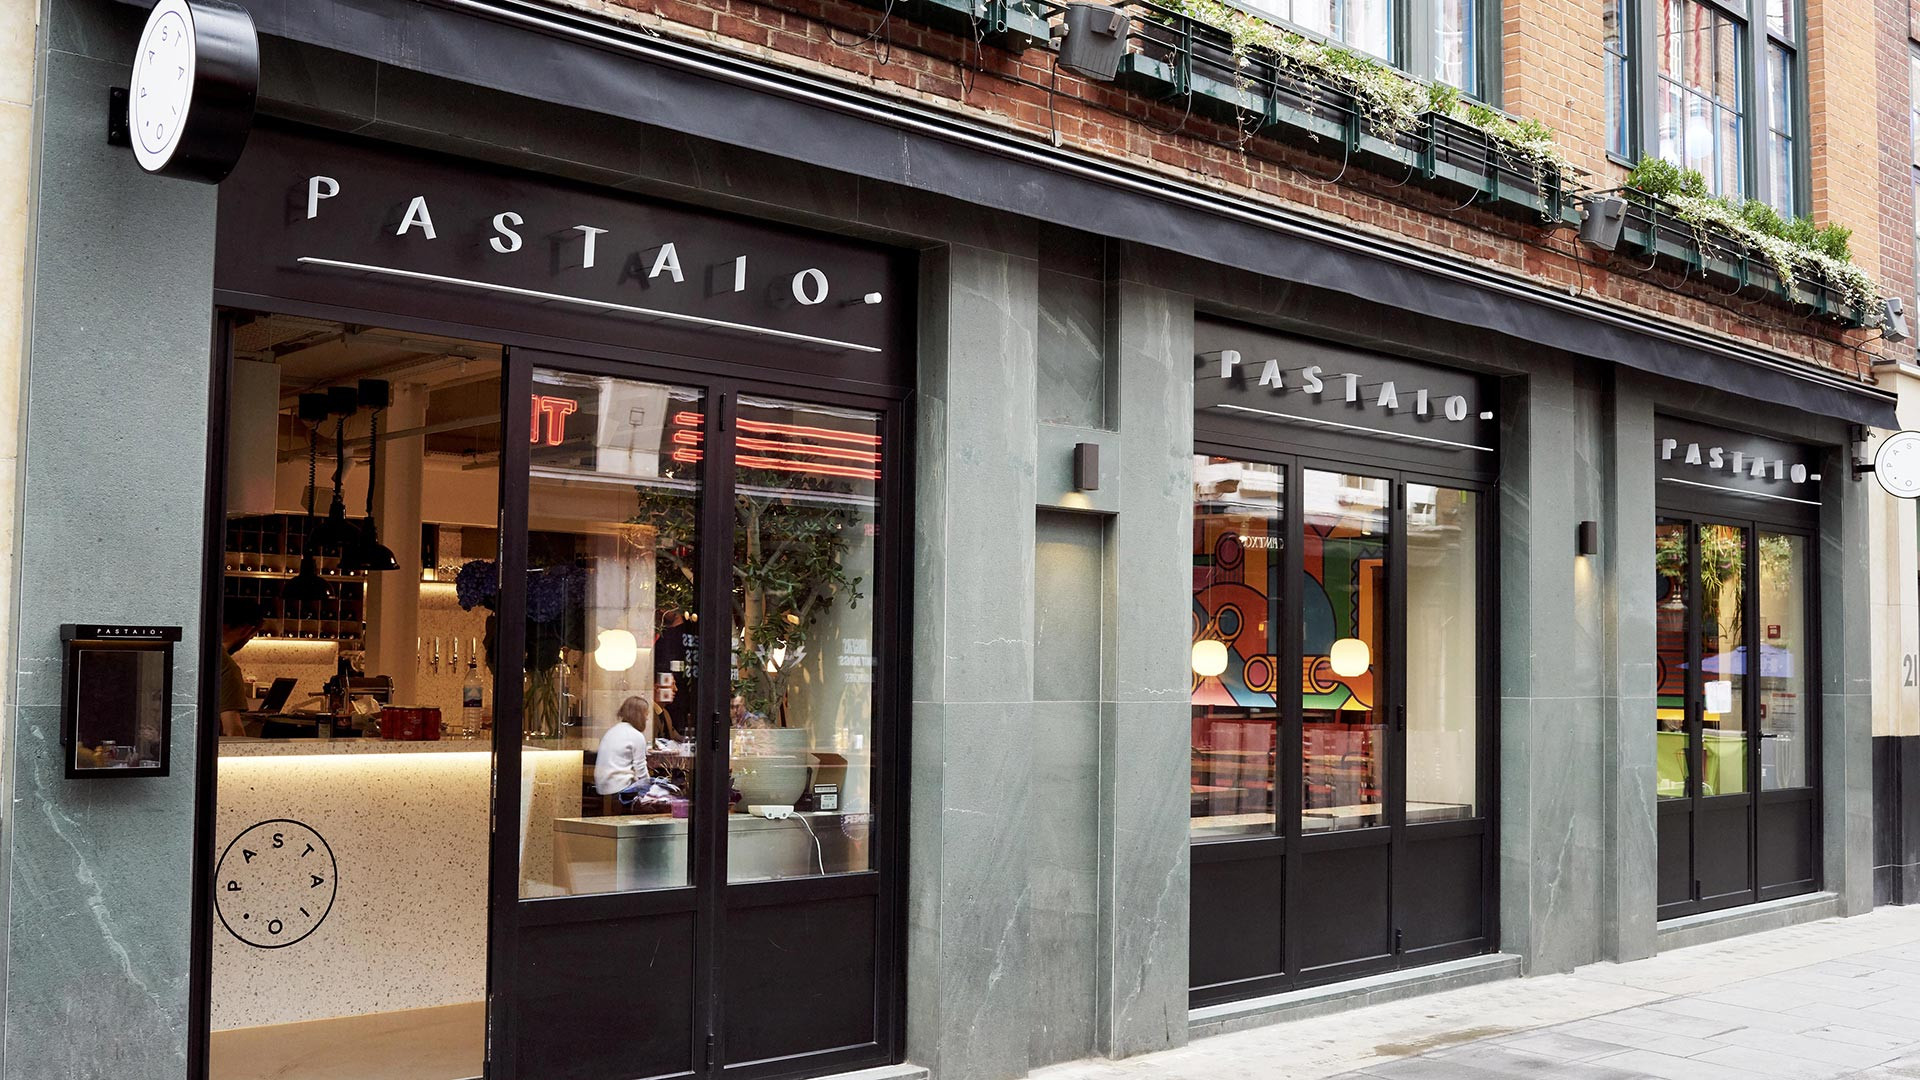 32 of the best pasta restaurants in London | The bold and the beautiful